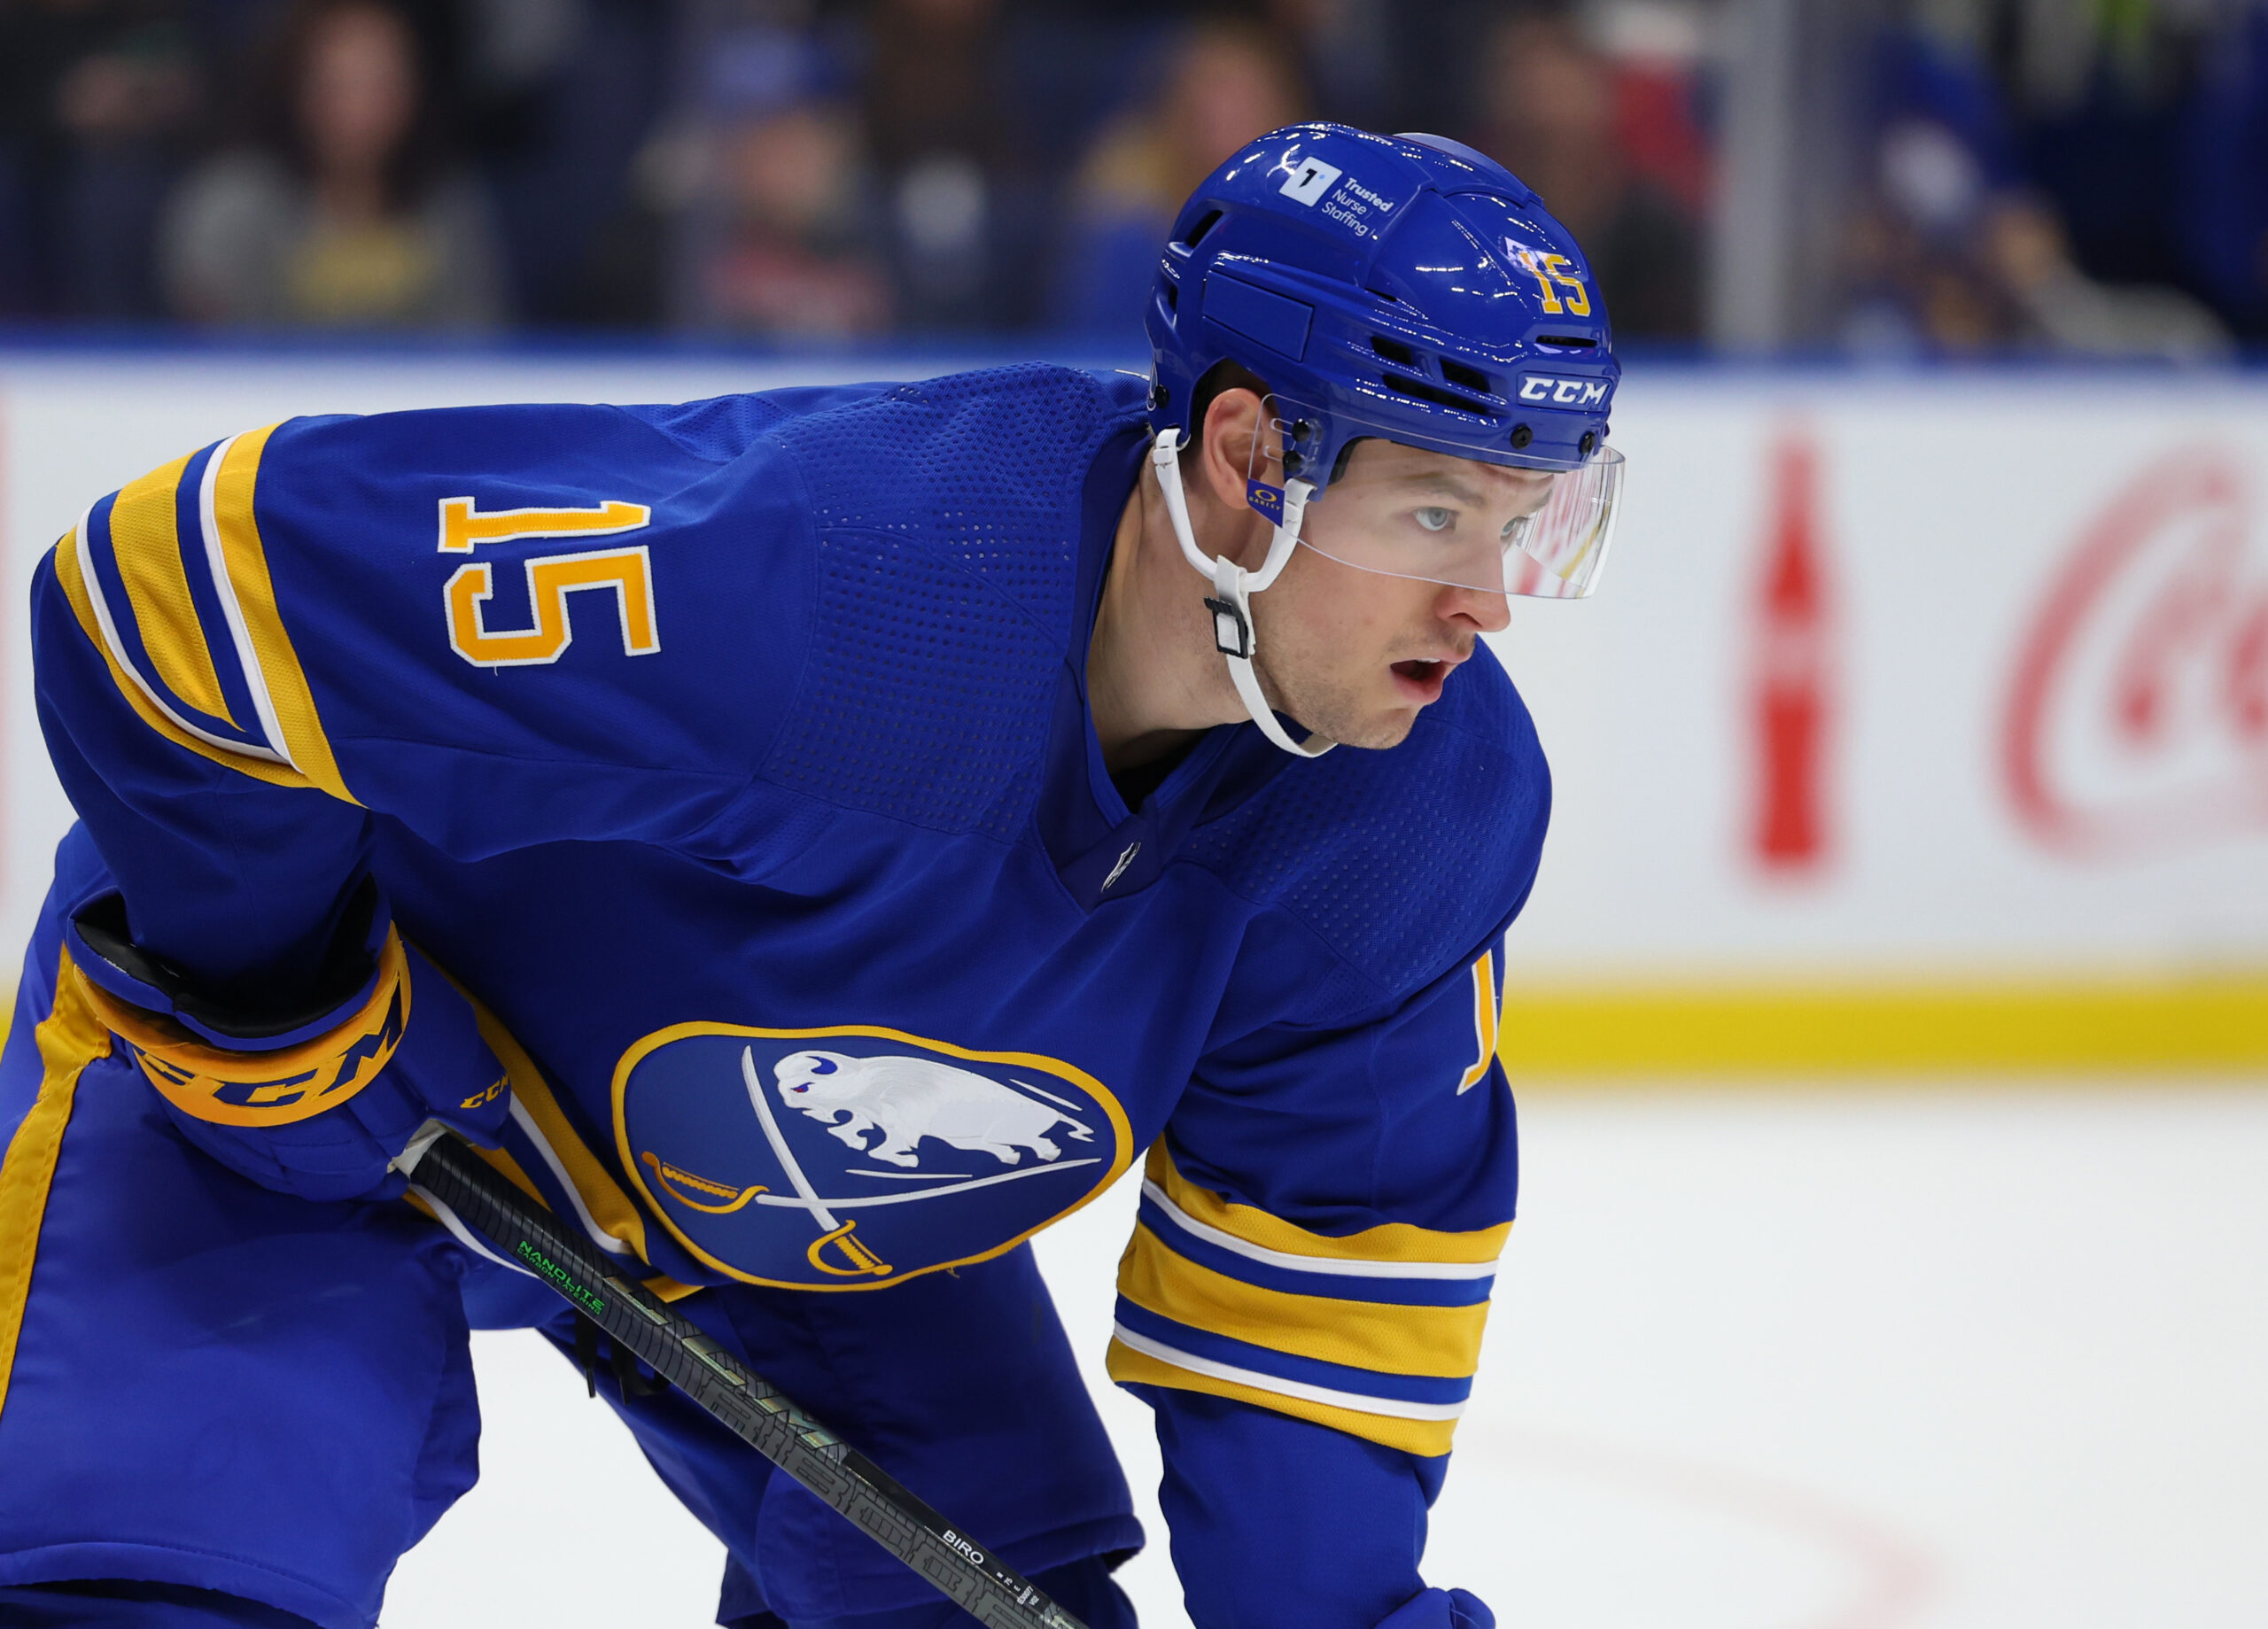 NHL: Blues coach says top players 'don't play with any passion